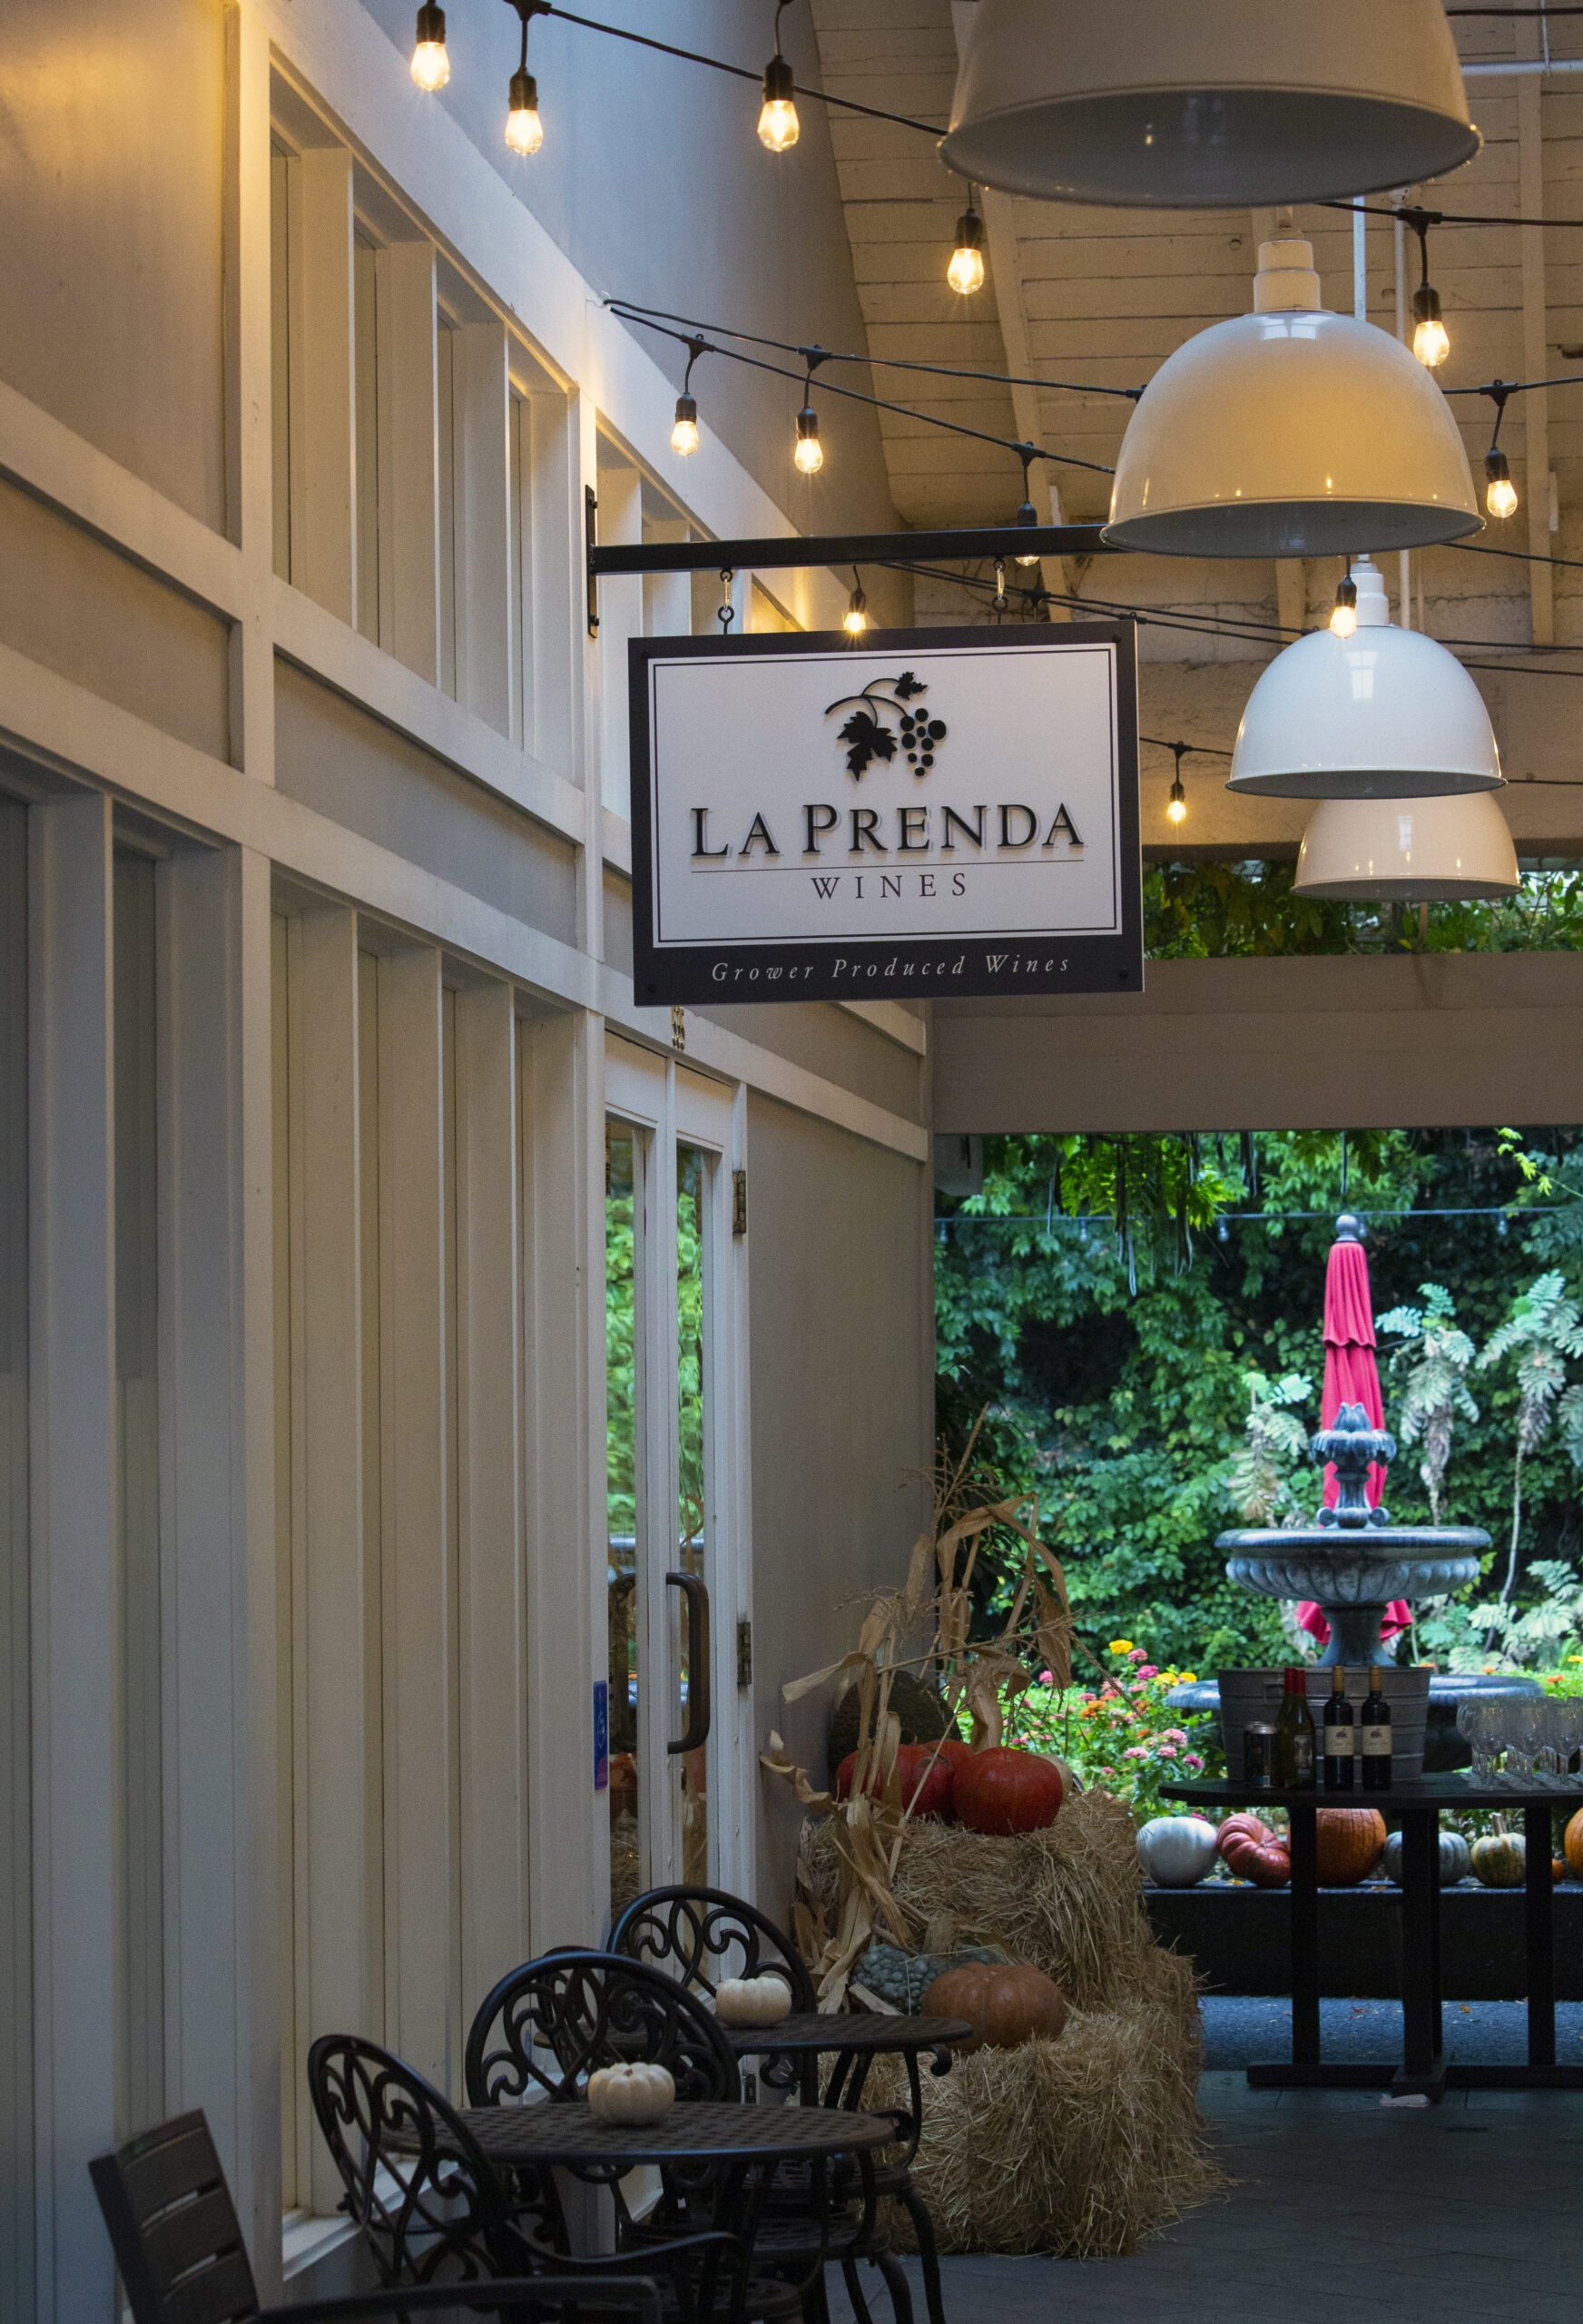 The La Prenda wines, in their new tasting room, next to The Red Grape on First Street West, on Wednesday, Oct. 20, 2021. (Photo by Robbi Pengelly/Index-Tribune)